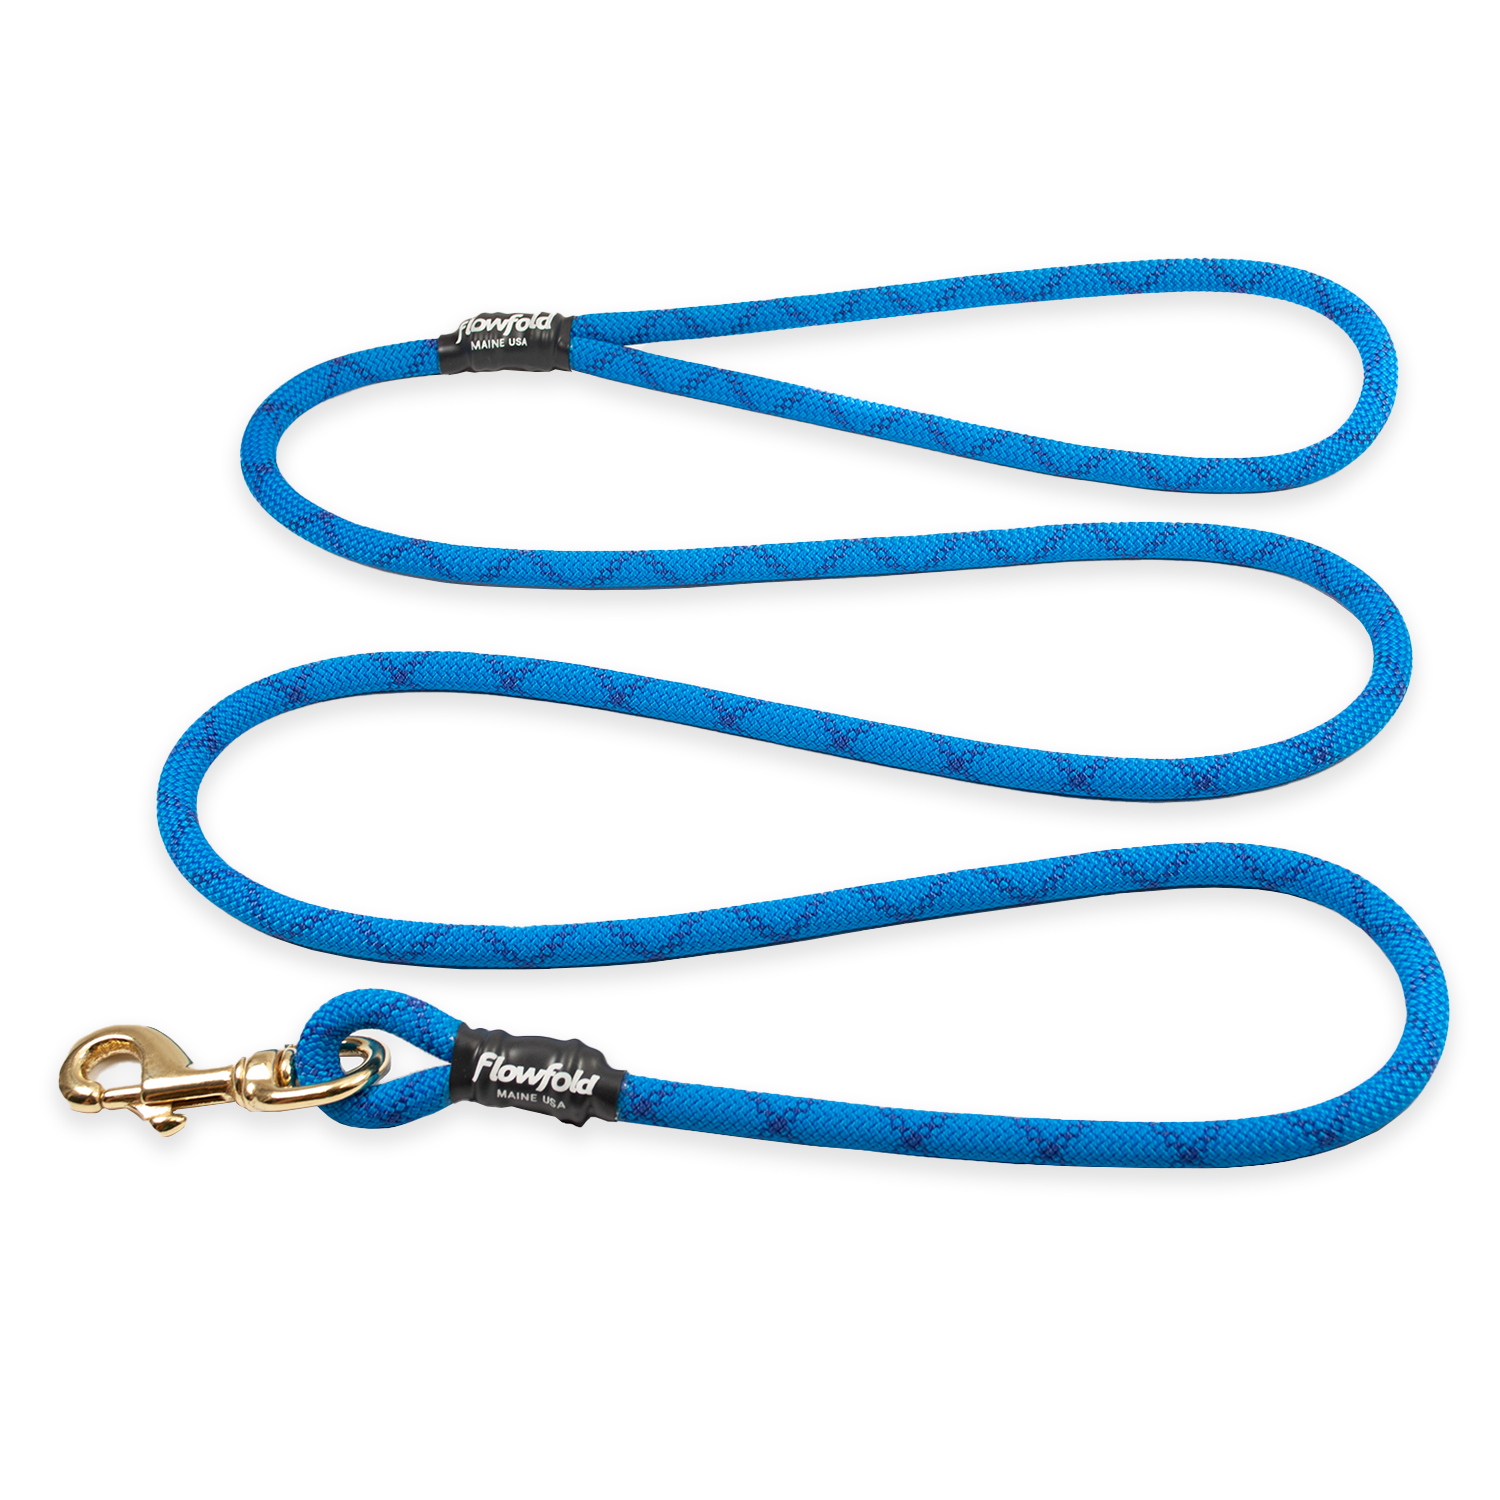 Flowfold Blue Trailmate Recycled Climbing Rope Dog Leash 6 Feet Made in USA